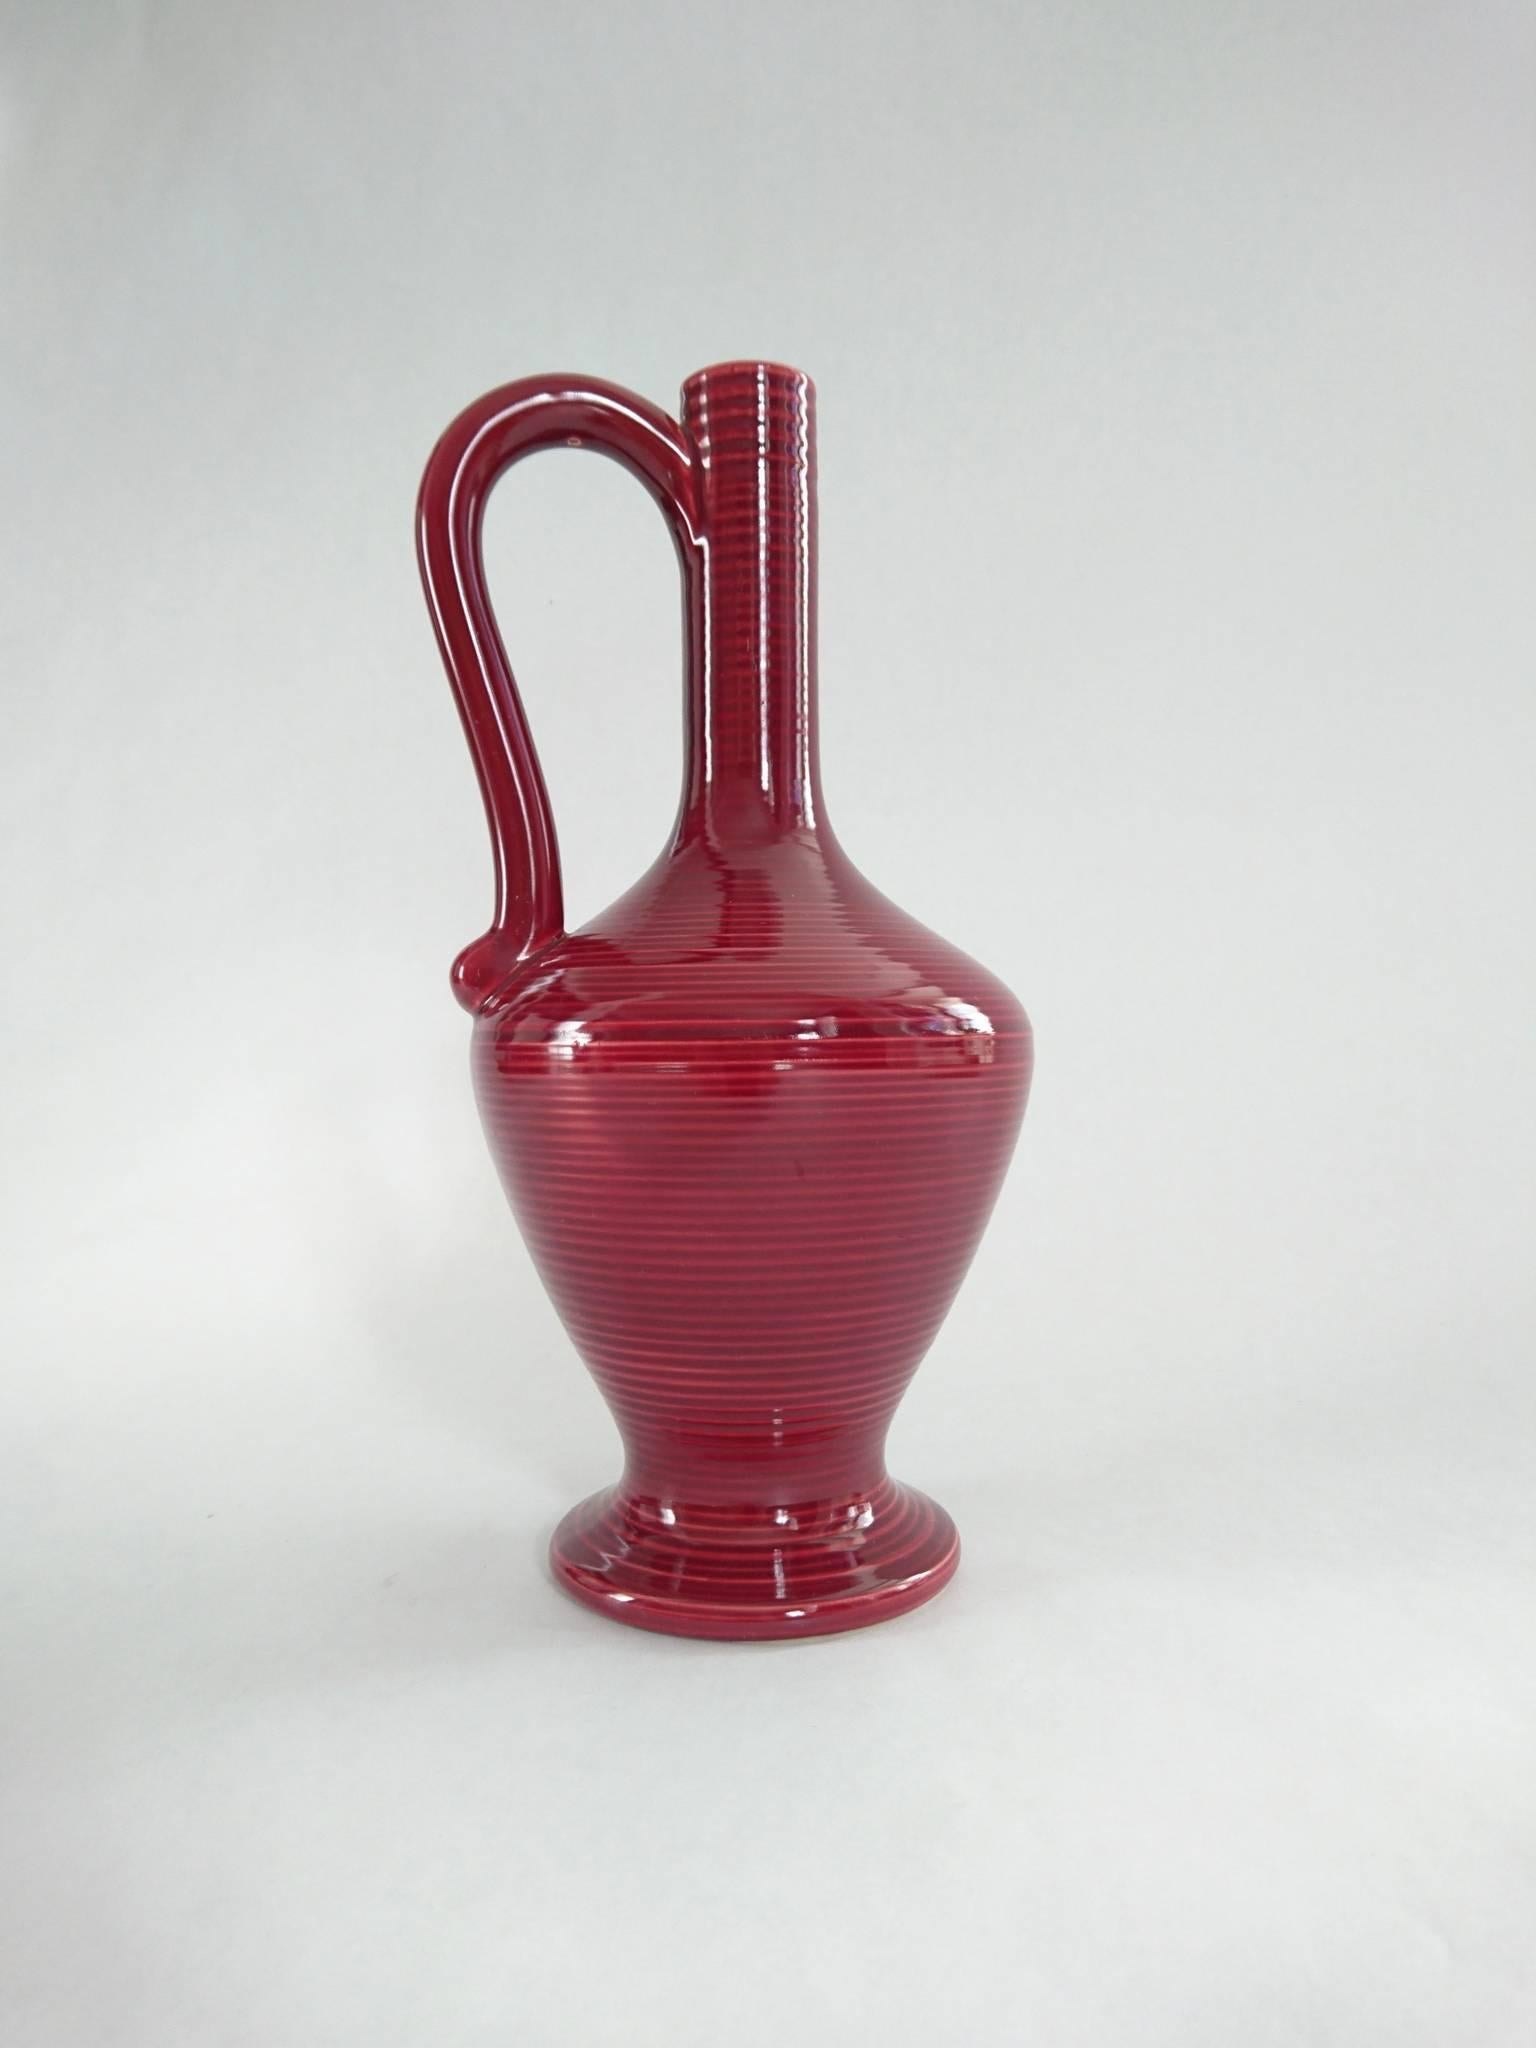 A 1950s midcentury horizontally striped red ceramic vase with handle produced by Höganäs Keramik, in deep red horizontal stripes by Holm and Bjurestig (H and B) between 1946-1956 which is the period when it was under H and B´s ownership. Marked at